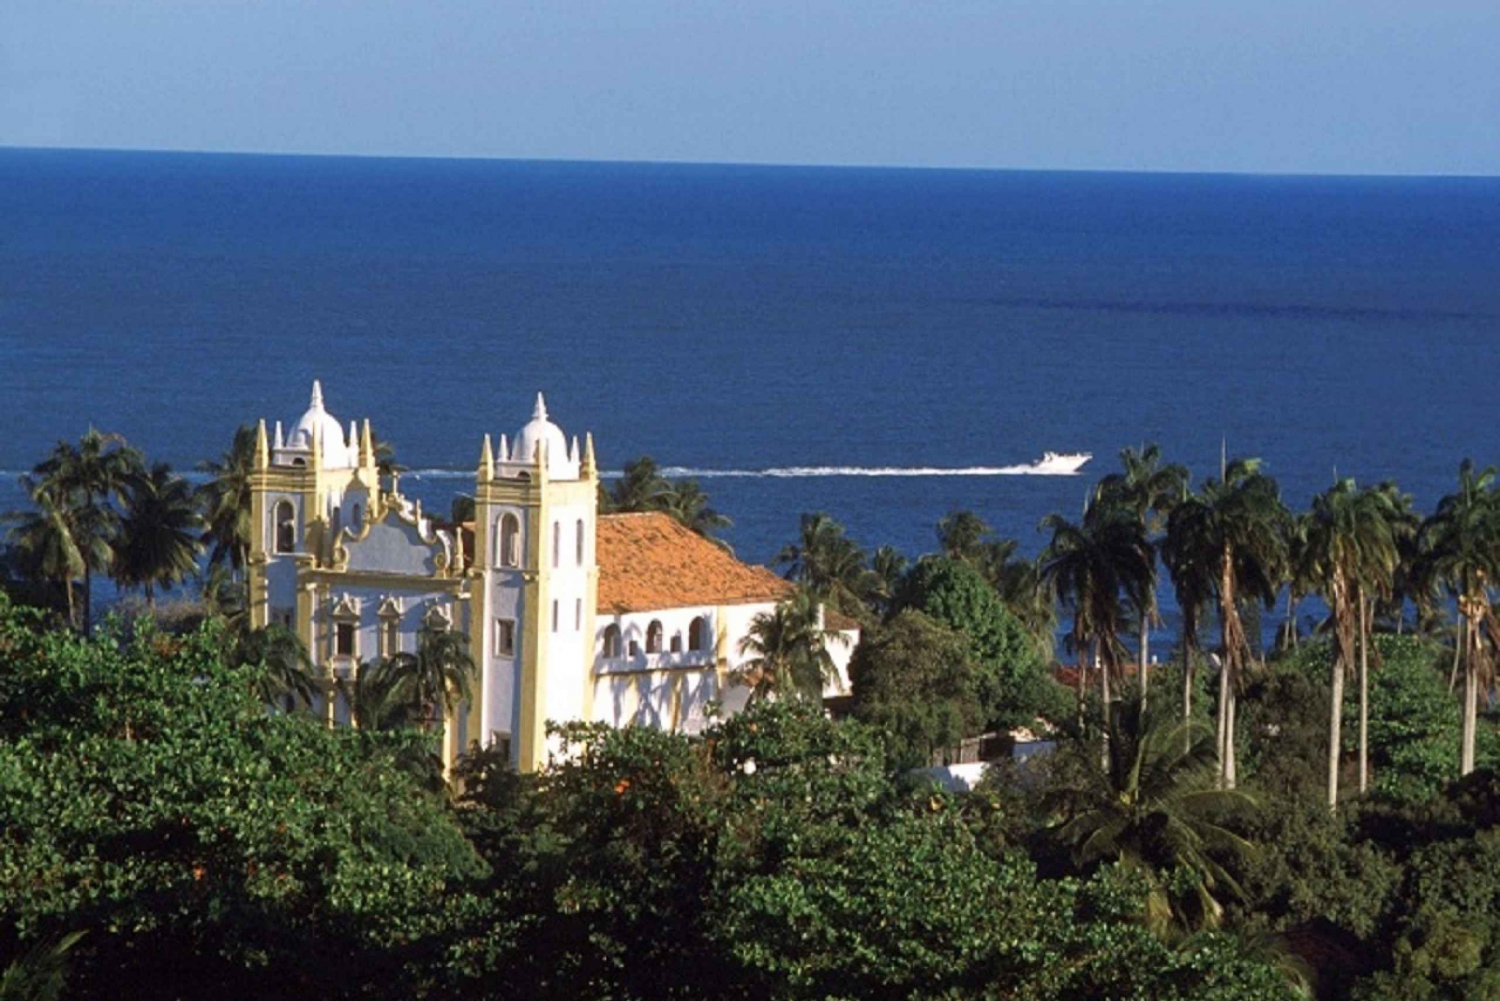 From Recife: Recife Old Town and Olinda City Tour